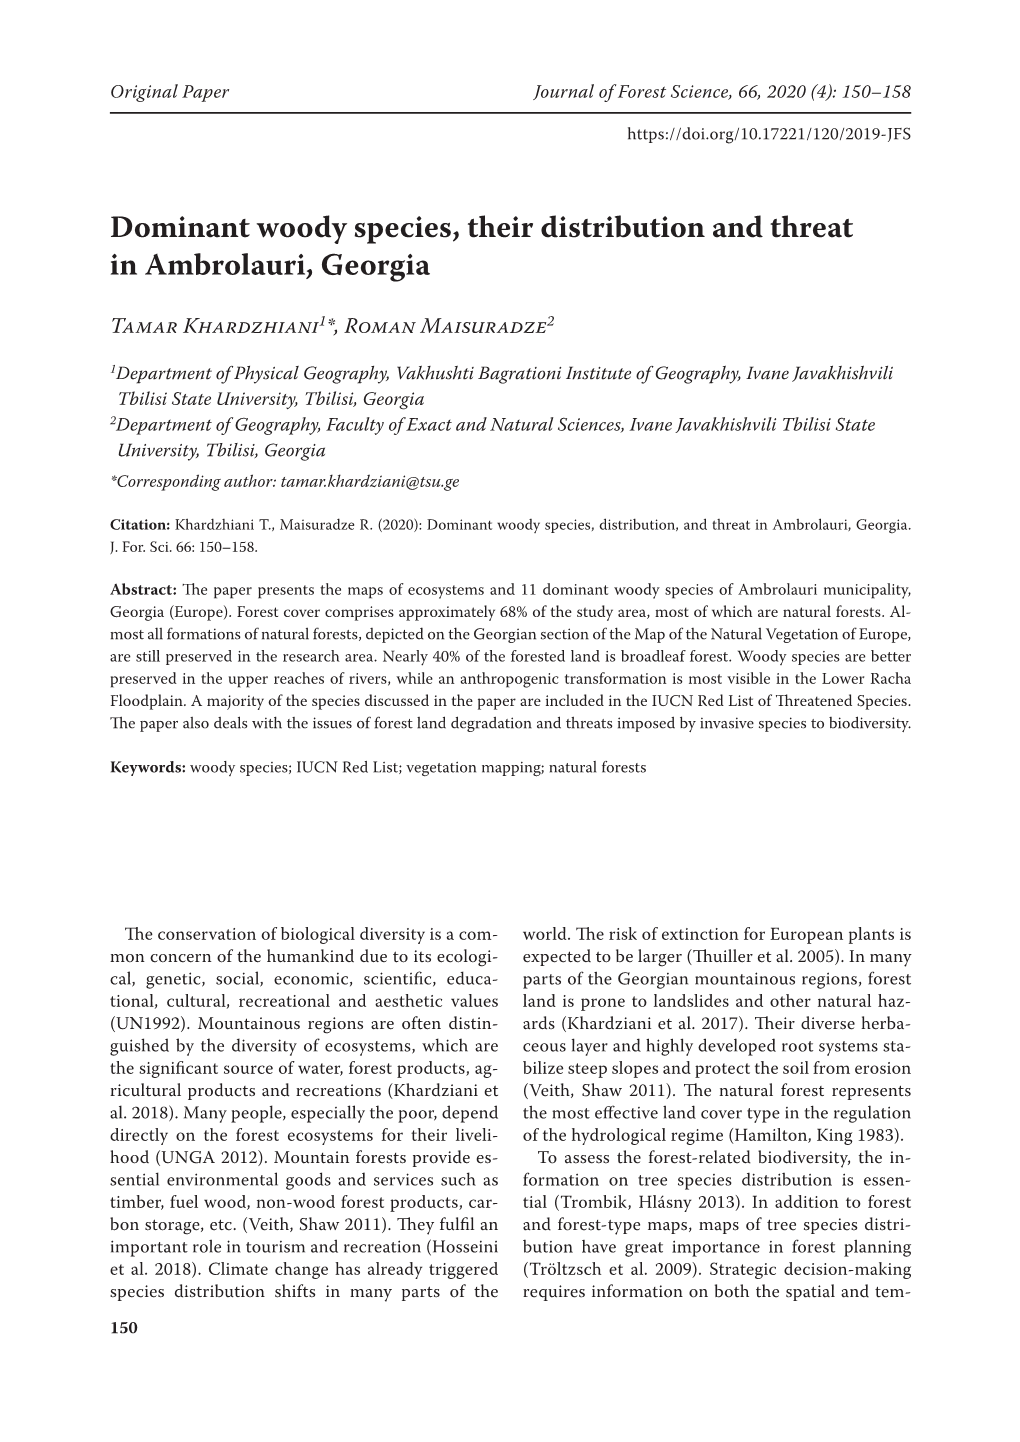 Dominant Woody Species, Their Distribution and Threat in Ambrolauri, Georgia